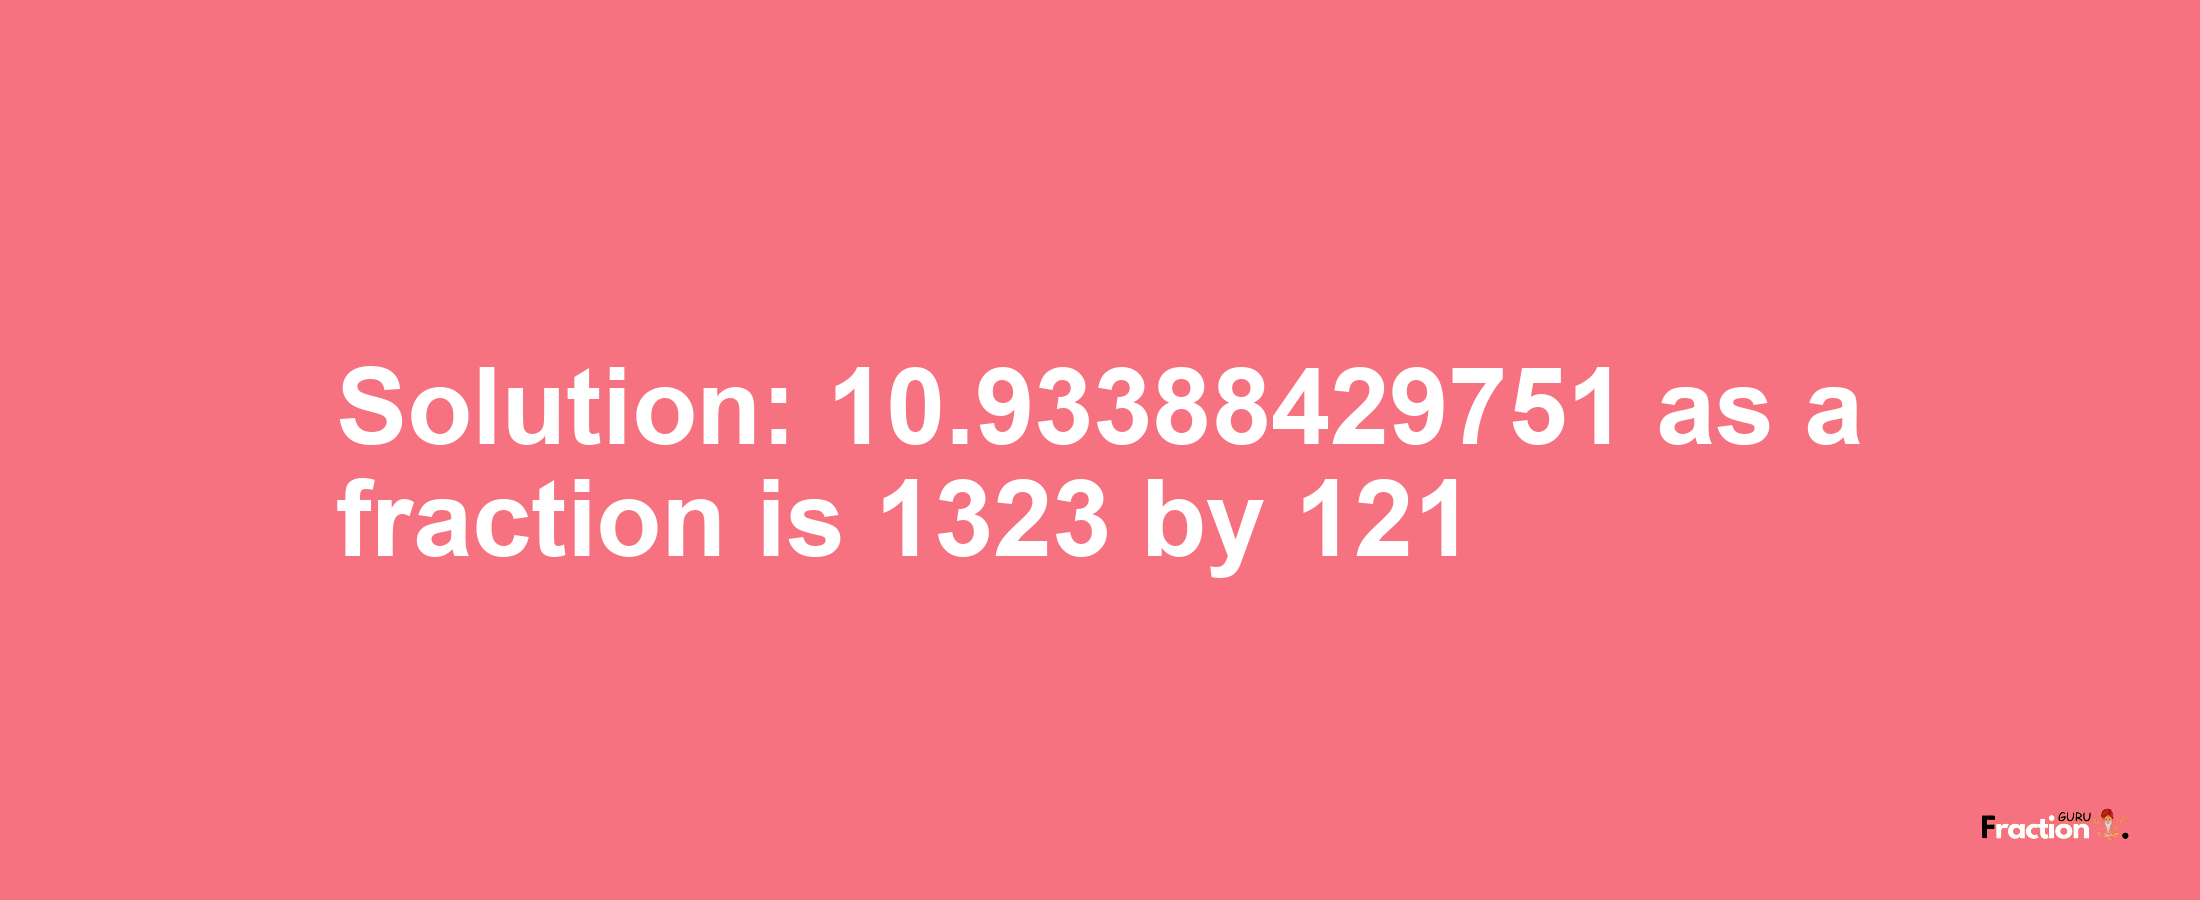 Solution:10.93388429751 as a fraction is 1323/121